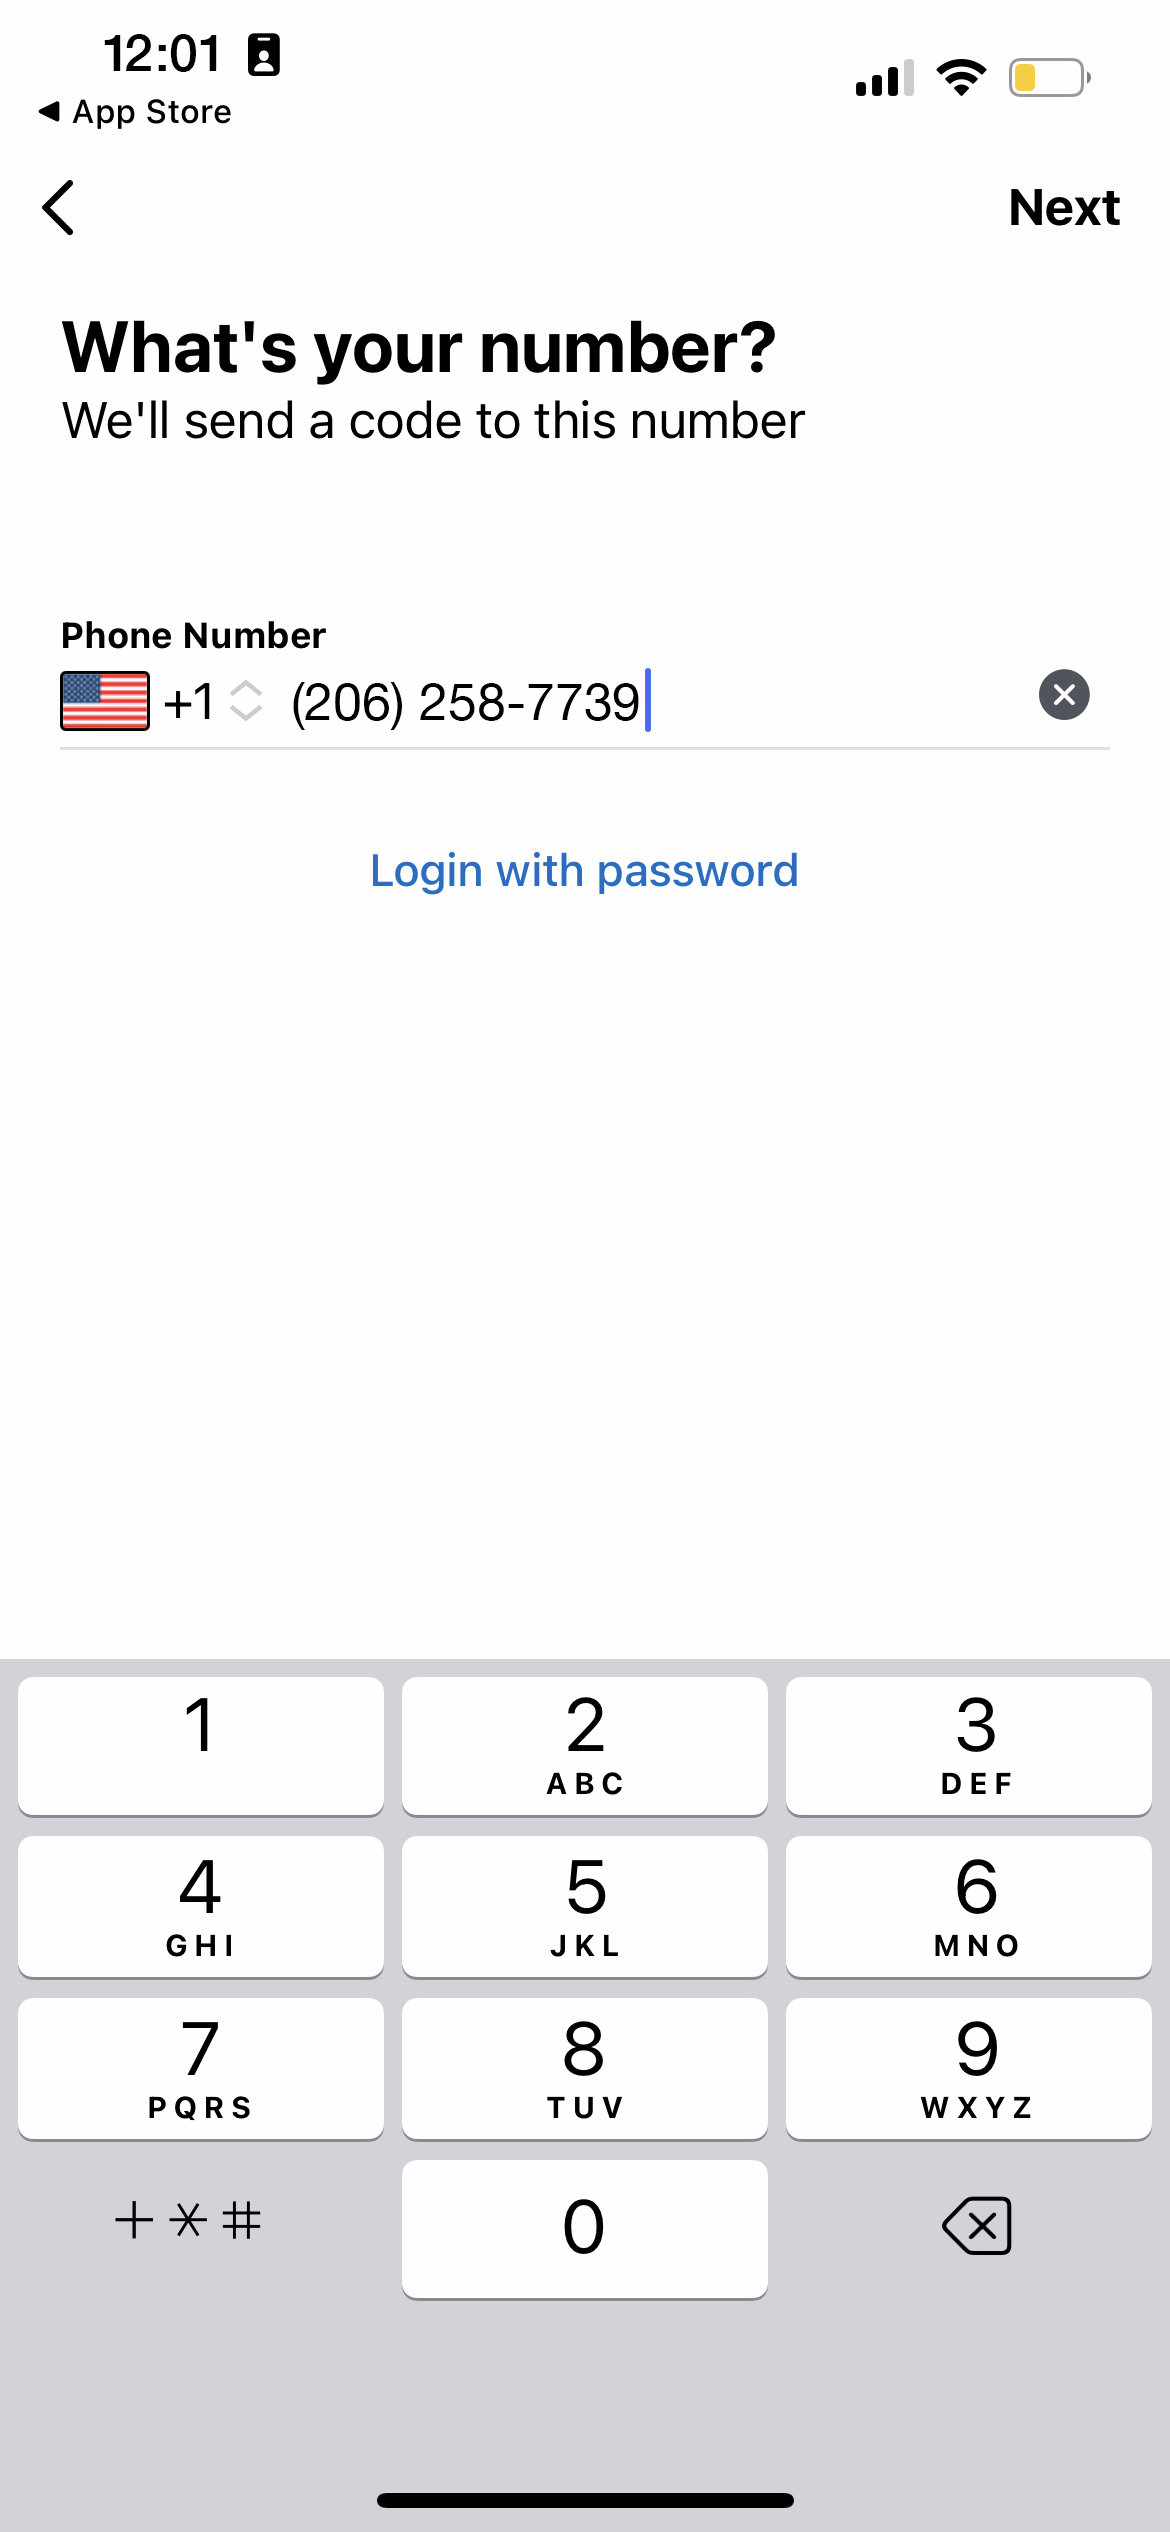 Image of a smartphone screenshot showing the Metro Flex app with a prompt to enter your phone number.